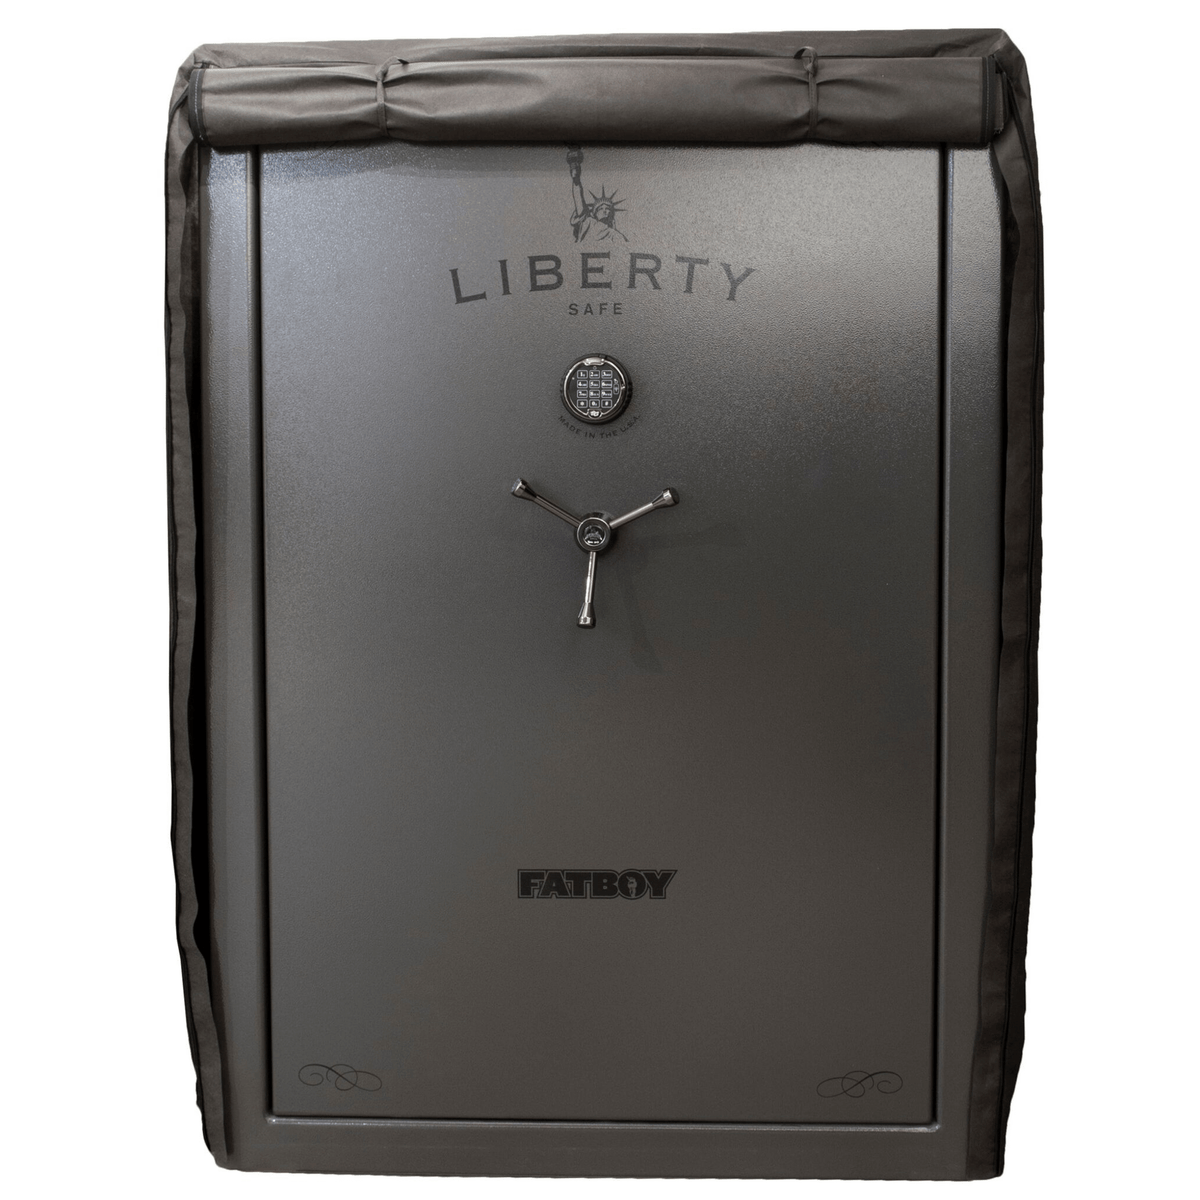 Accessory - Security - Safe Cover - 64 size safes | Liberty Safe Norcal.